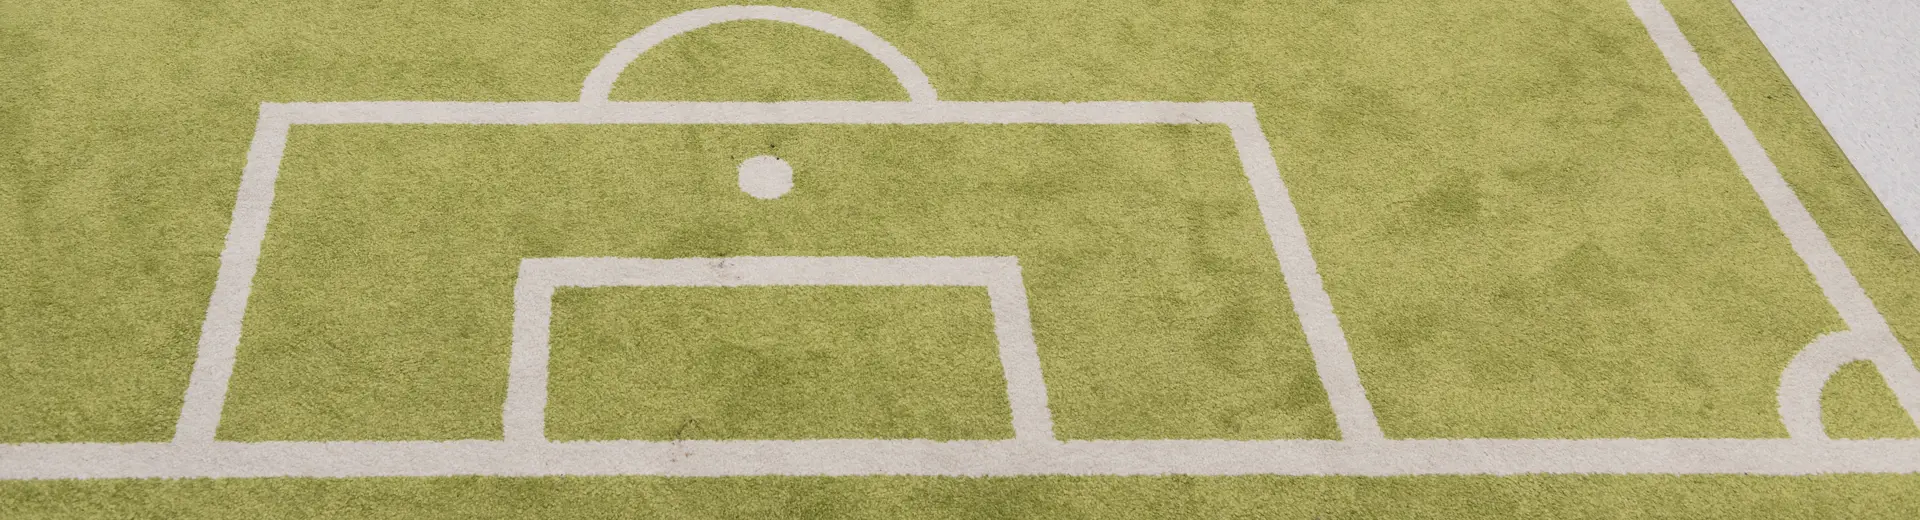 Very small robot on a miniature football pitch